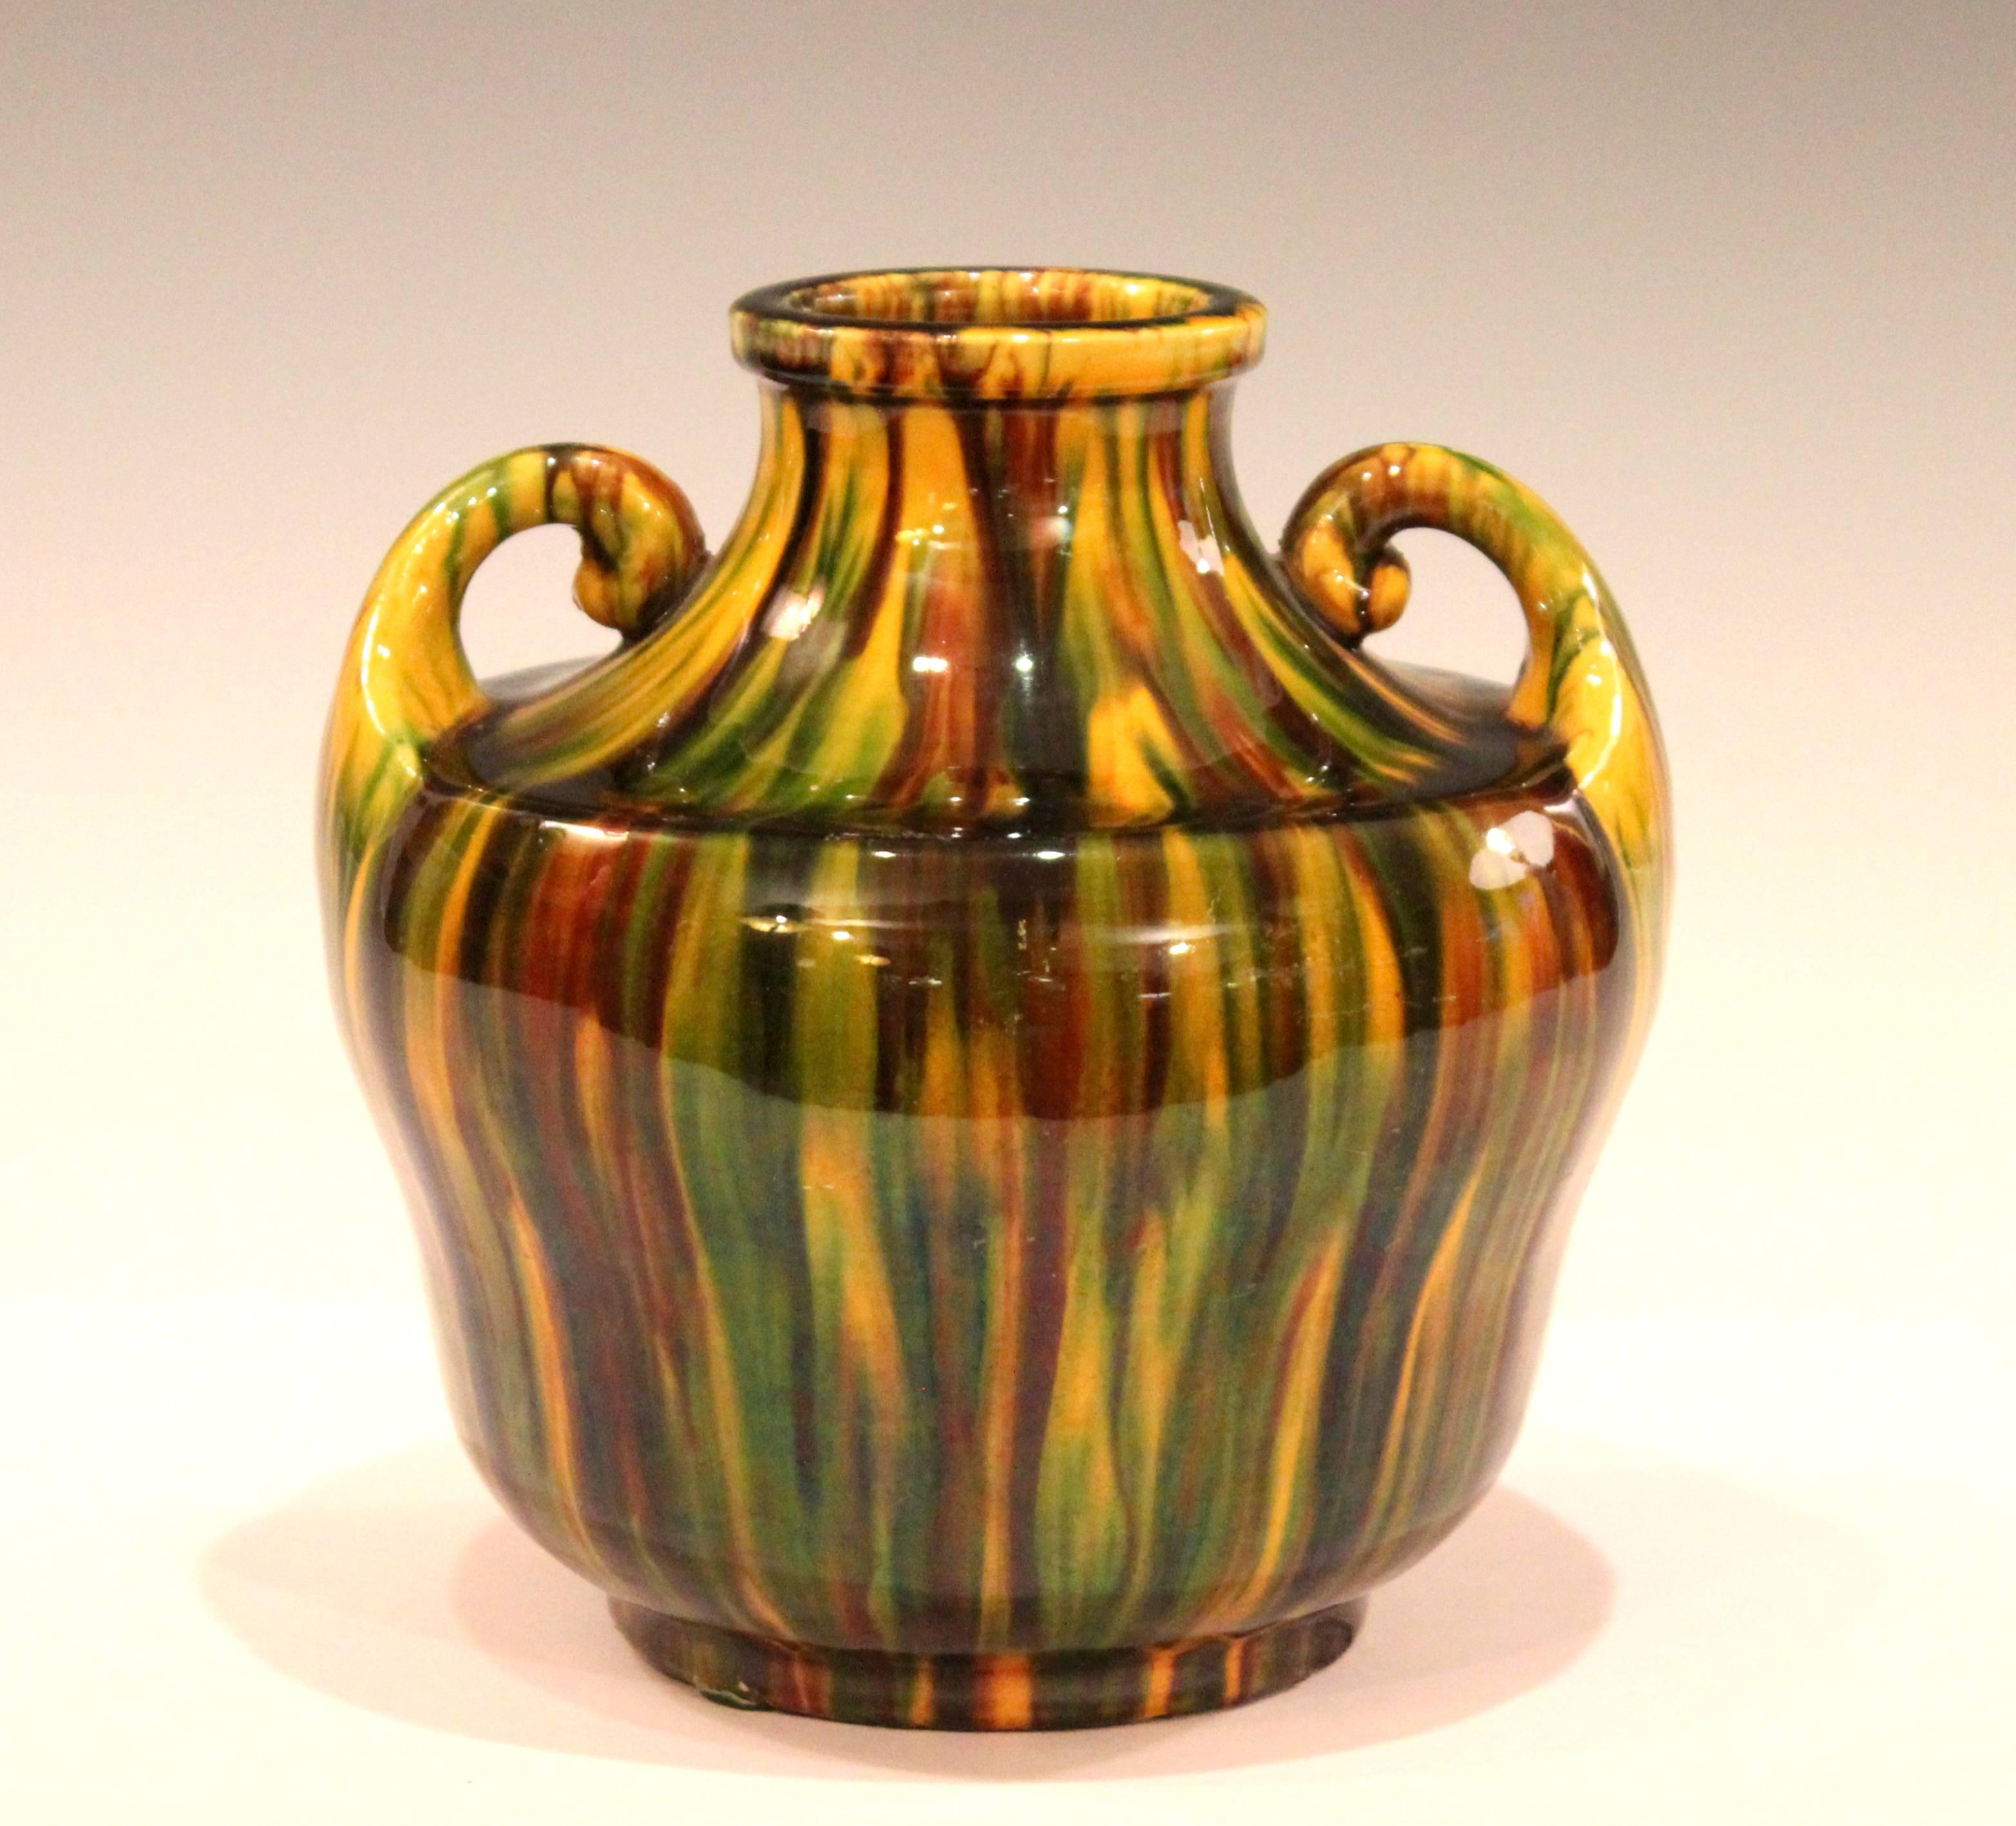 Awaji Pottery vase in Art Deco form with little handles curled over the wide, recessed shoulder and striking yellow flambe glaze, circa 1930. Impressed marks. Measure: 6 1/8